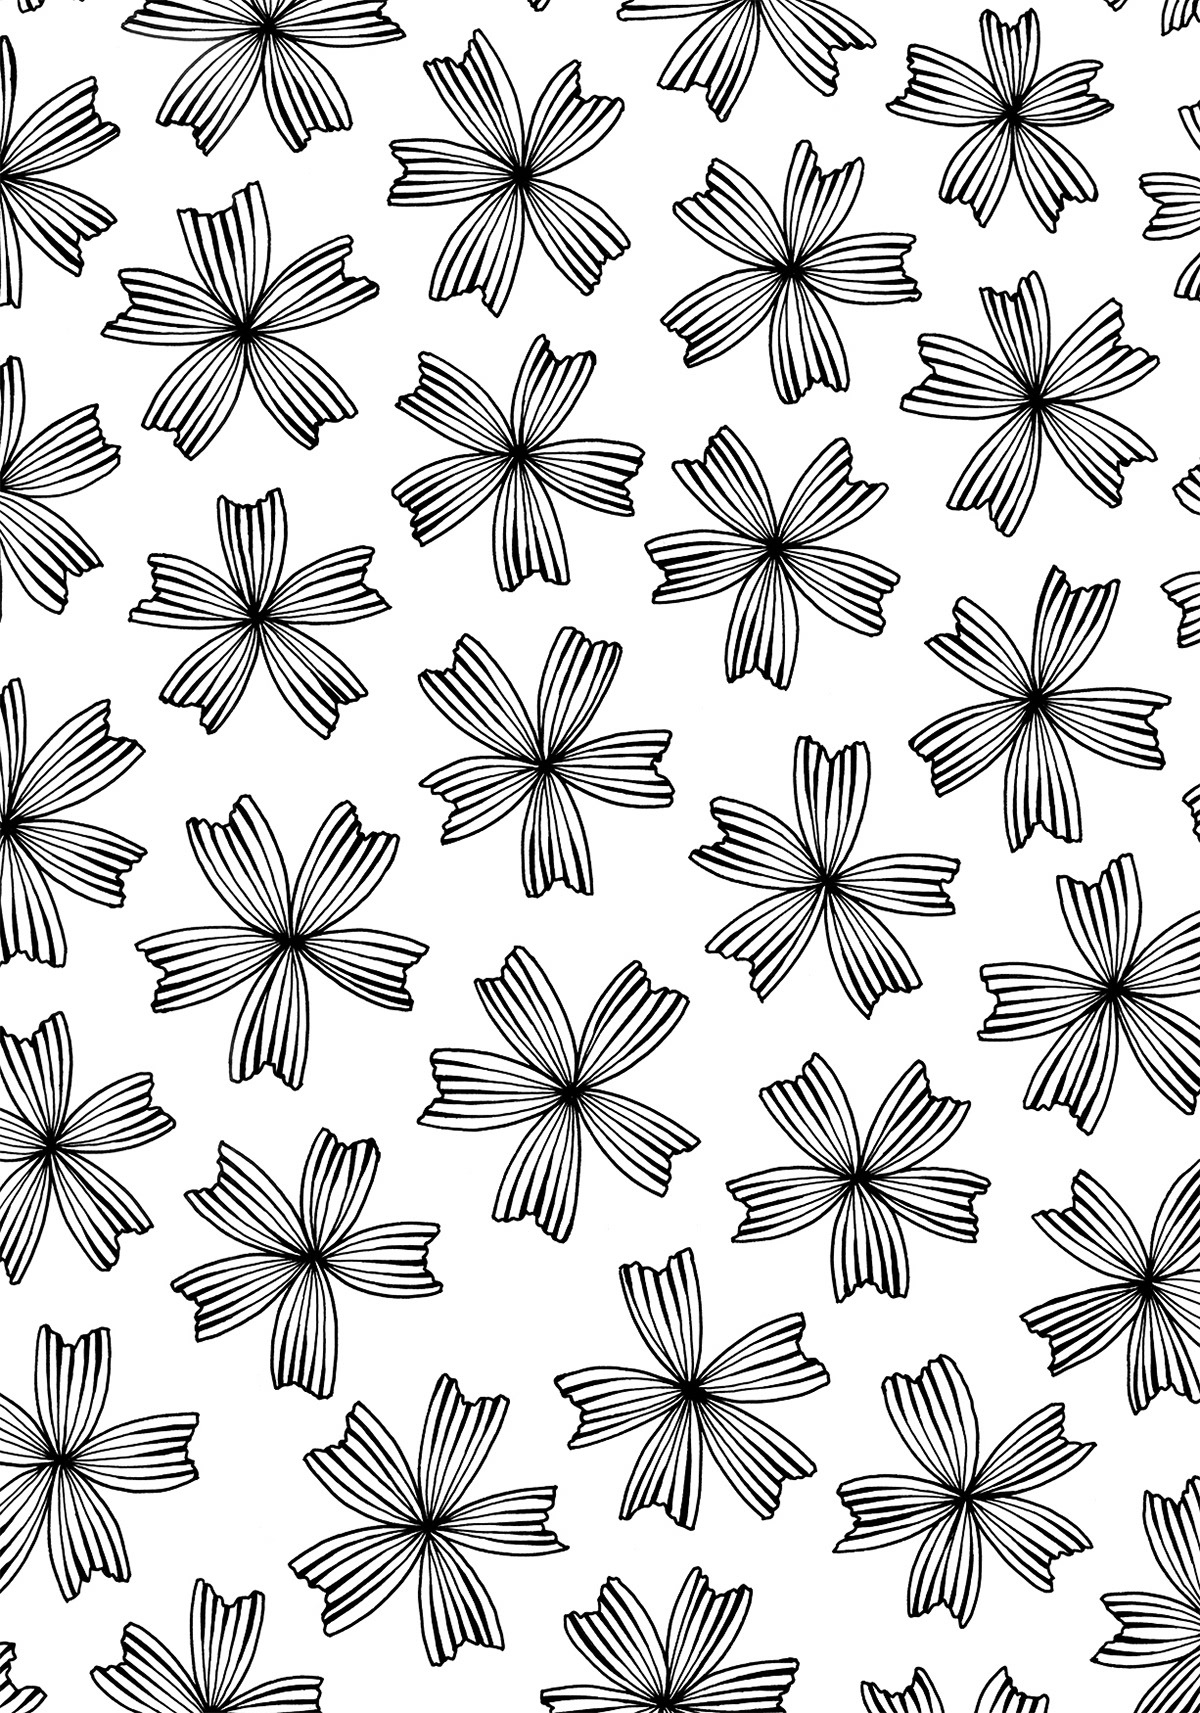 Black and white pattern inspired by flowers in Galicia, Spain, by Stillo Noir